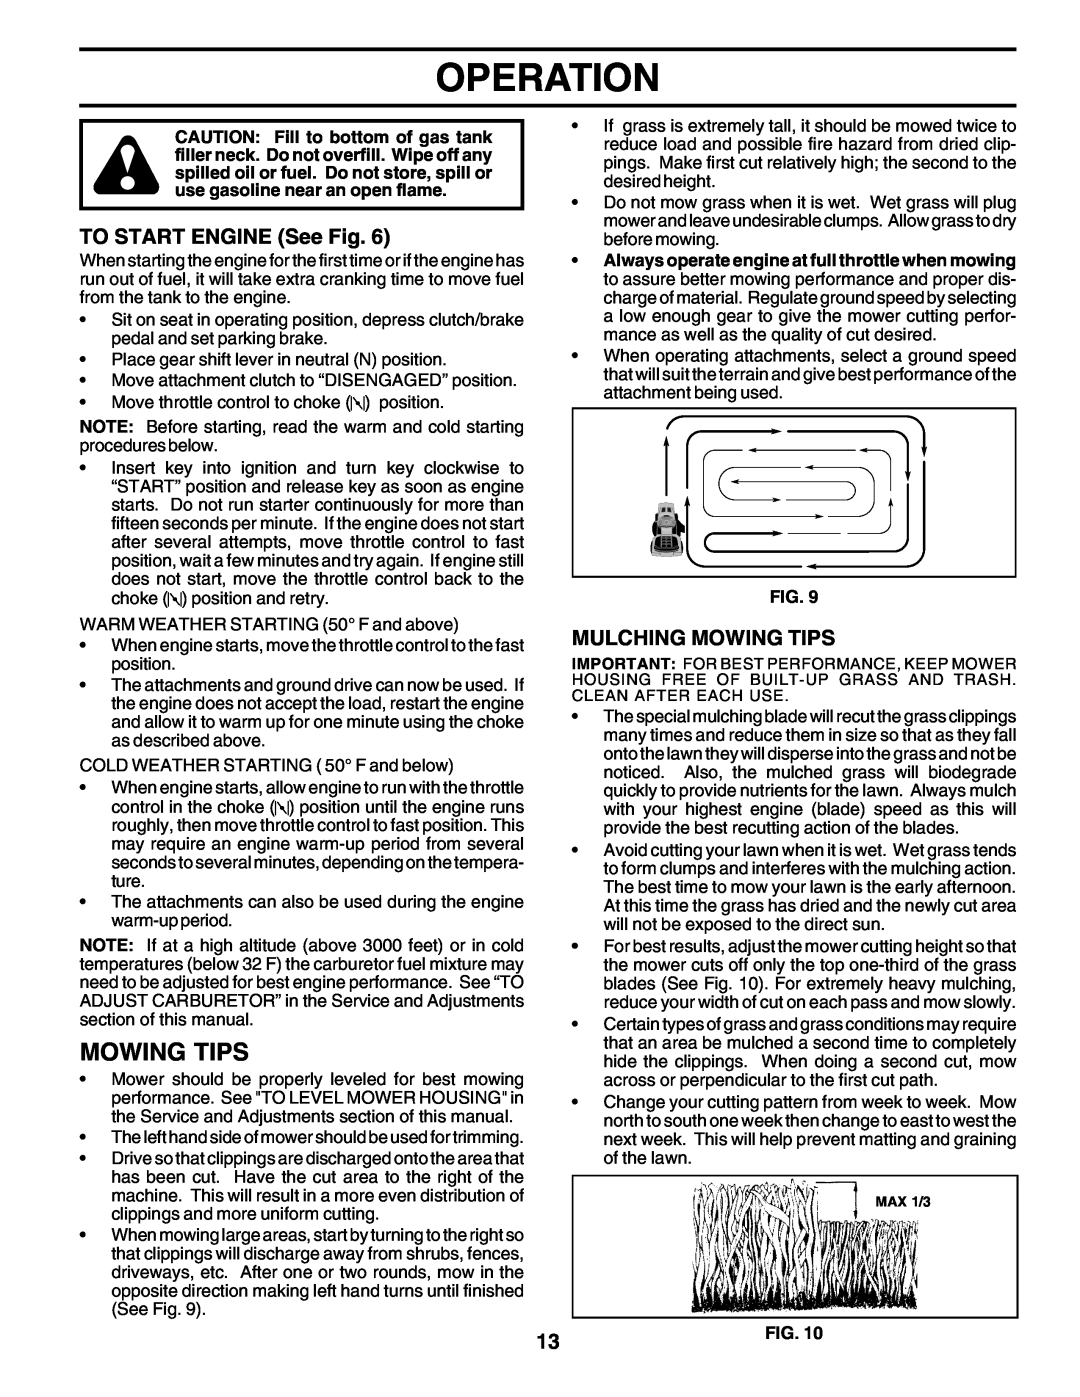 Poulan 180198 owner manual TO START ENGINE See Fig, Mulching Mowing Tips, Operation 